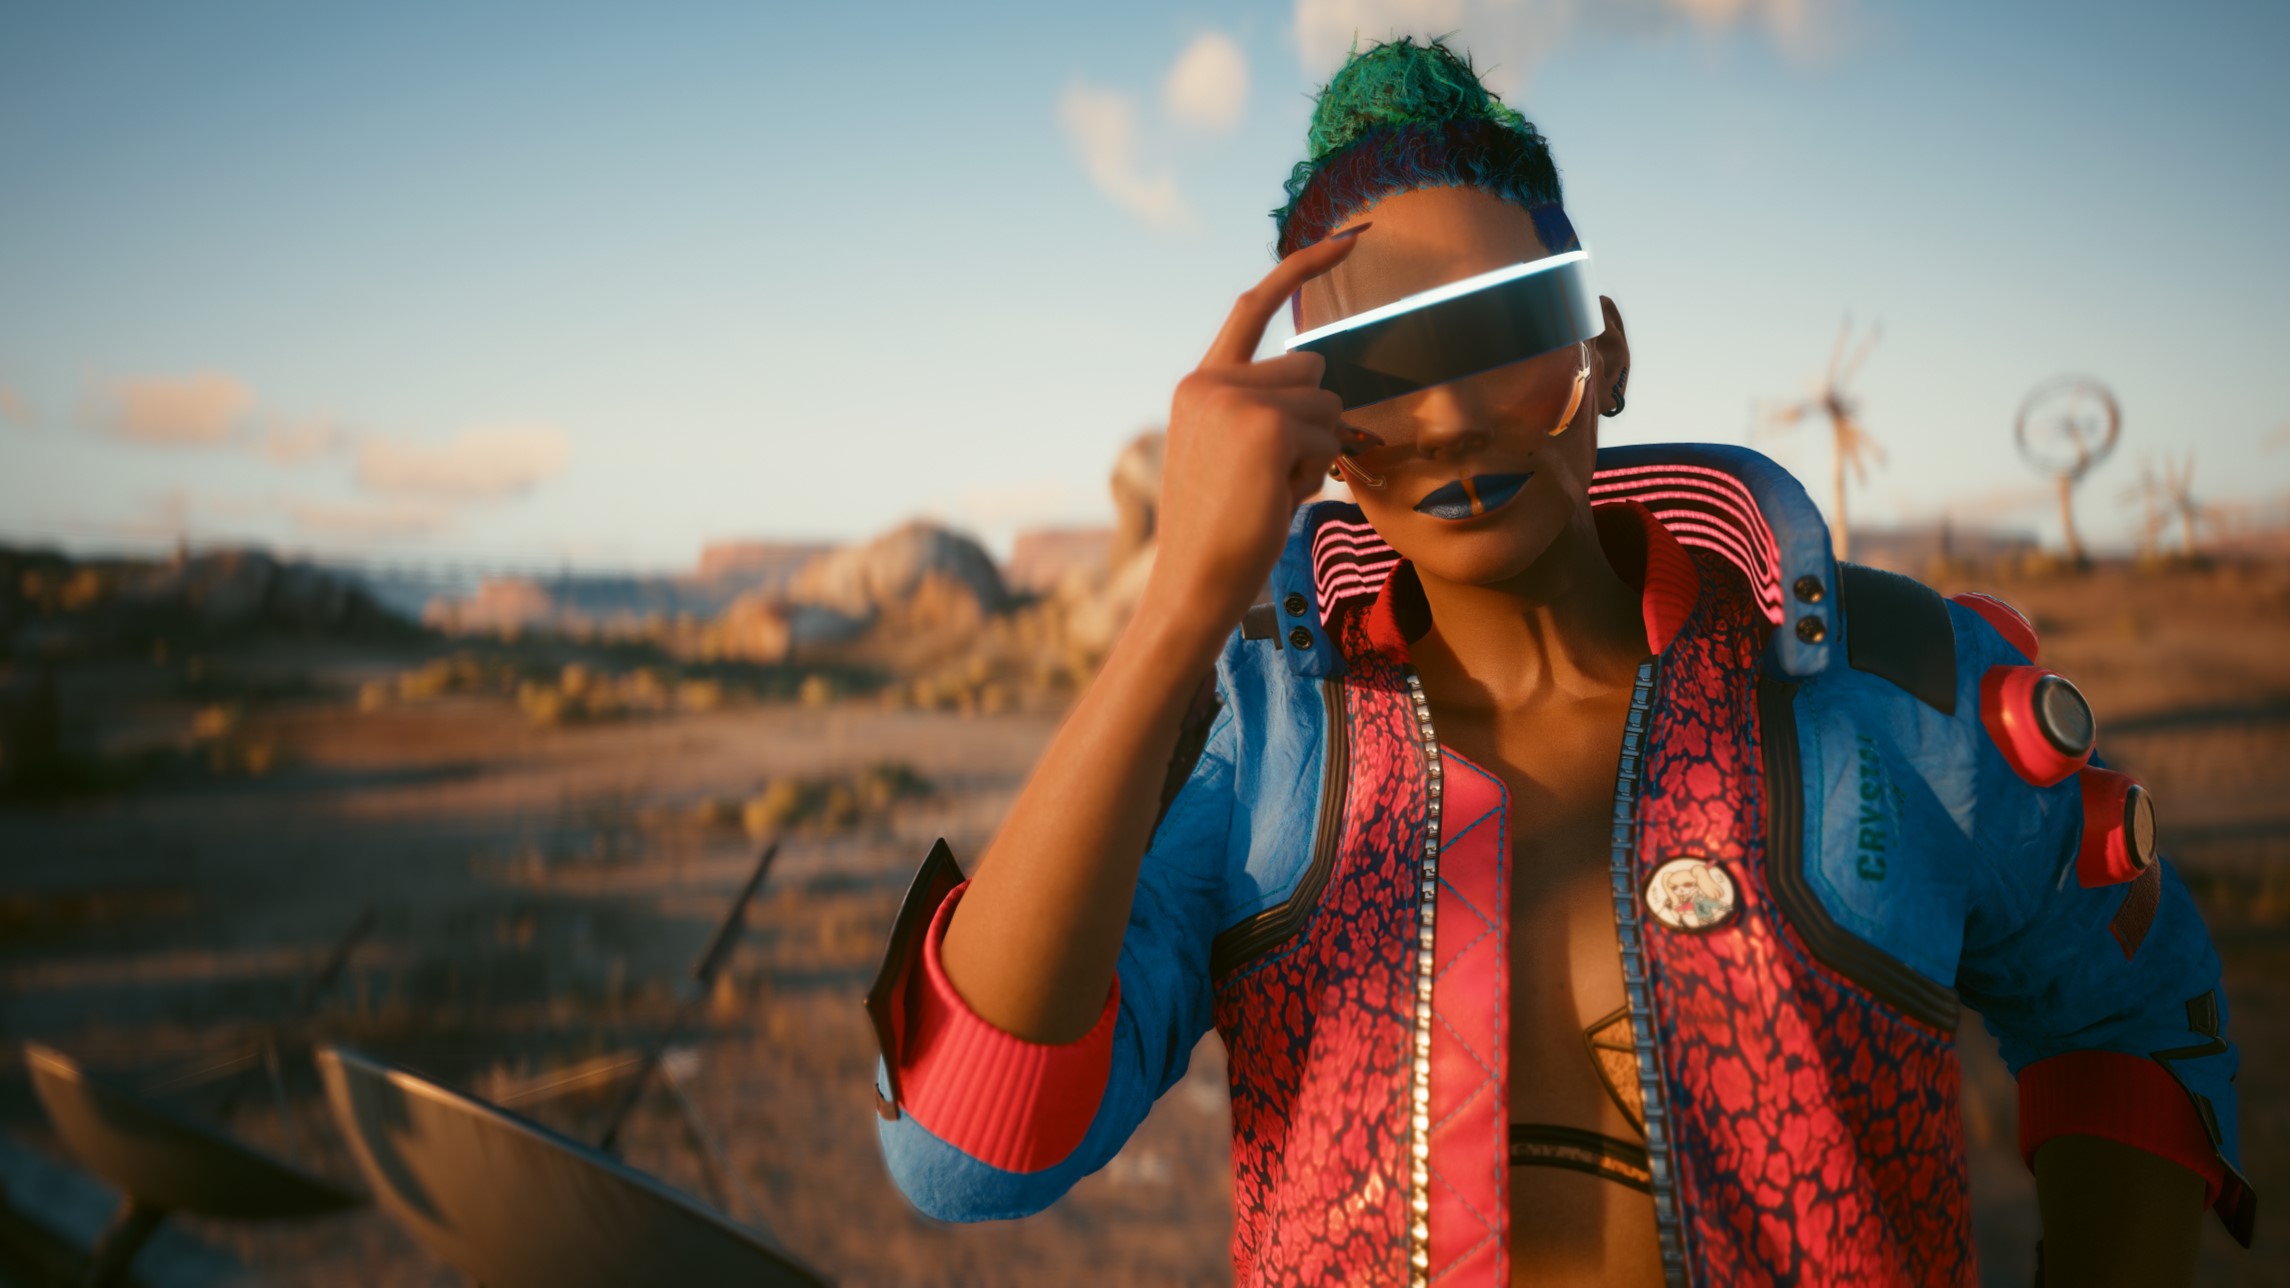  Cyberpunk 2077 director says CD Projekt never considered walking away at any point over the last 3 years: 'it was all culminating in 2.0' 